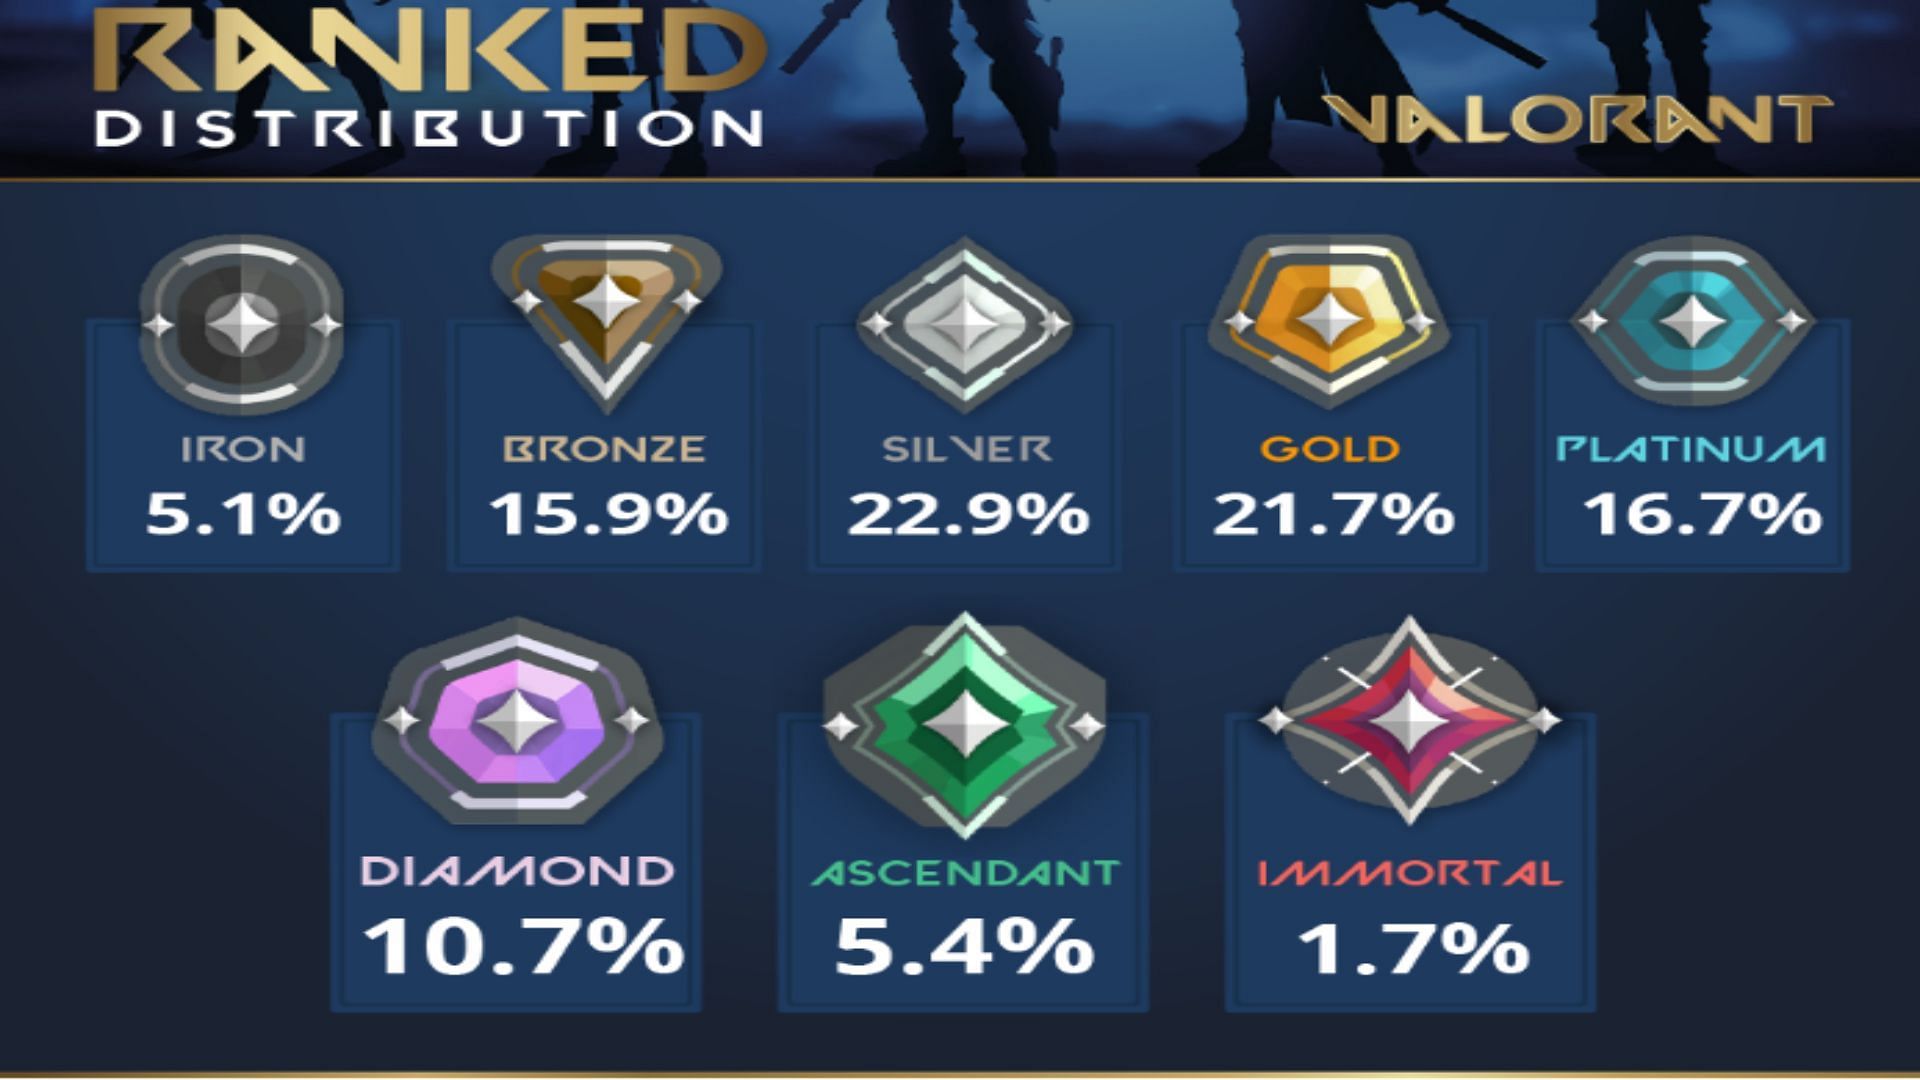 What is Valorant's rank distribution as of Patch 5.09?